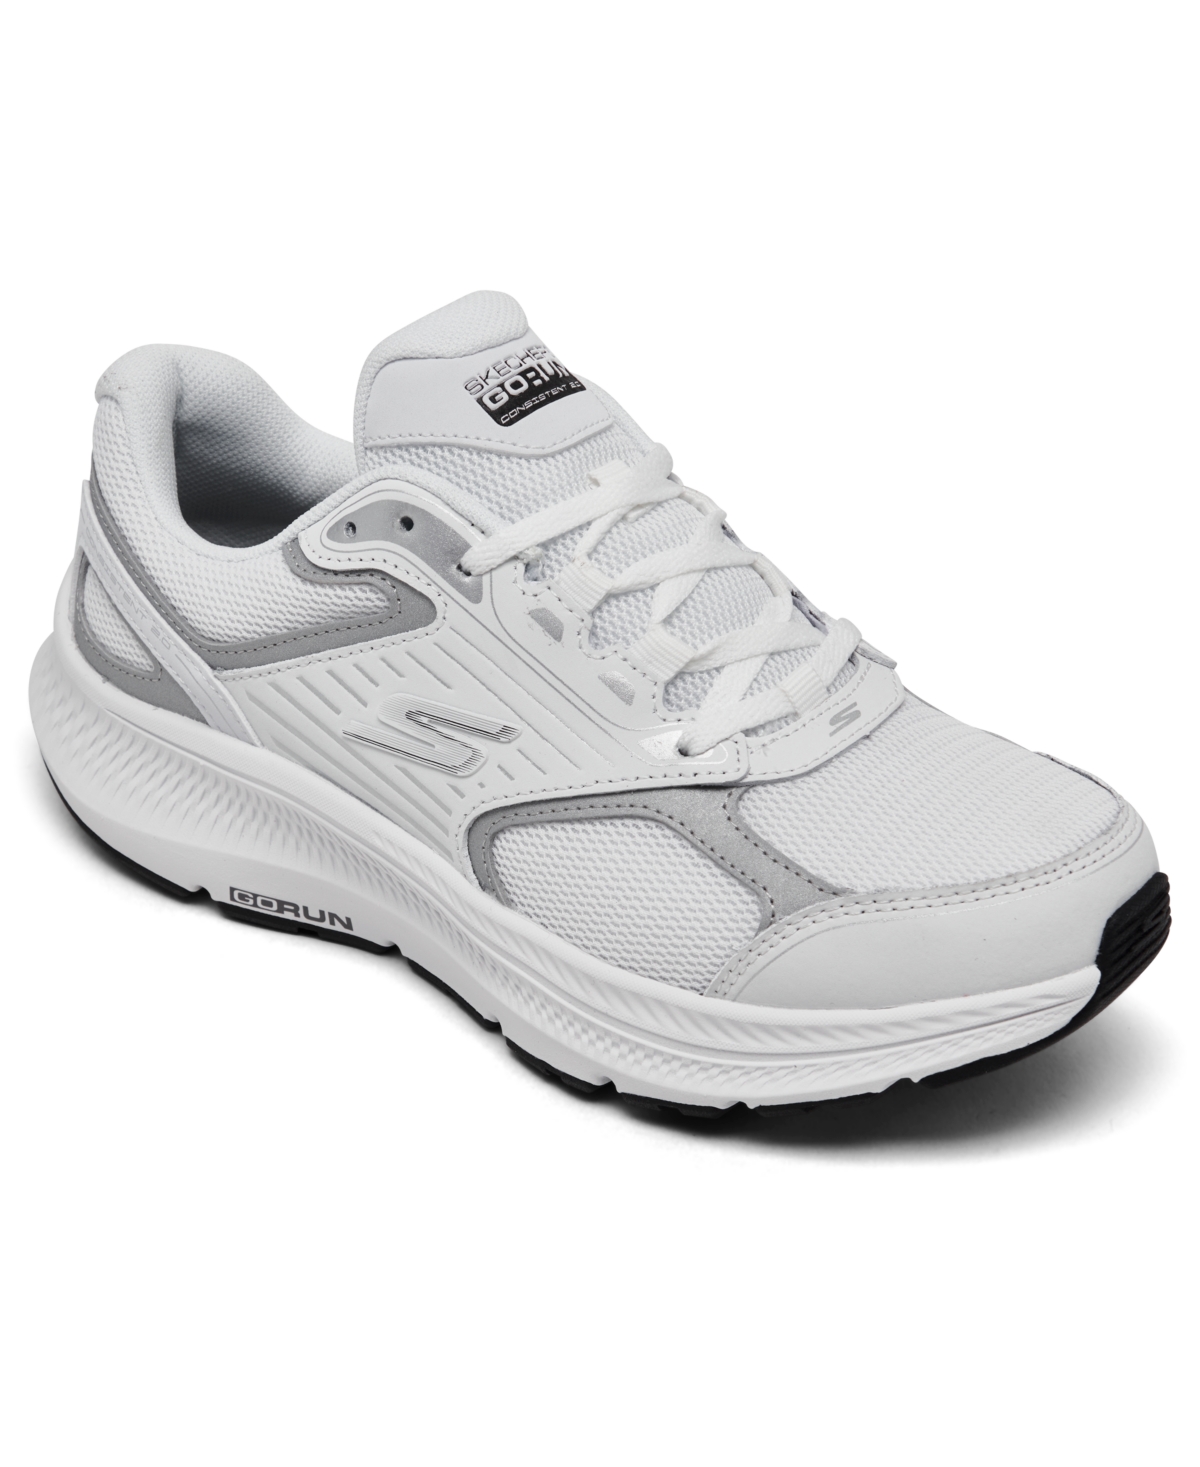 Women's Go run Consistent 2.0 - Advantage Running Sneakers from Finish Line - White